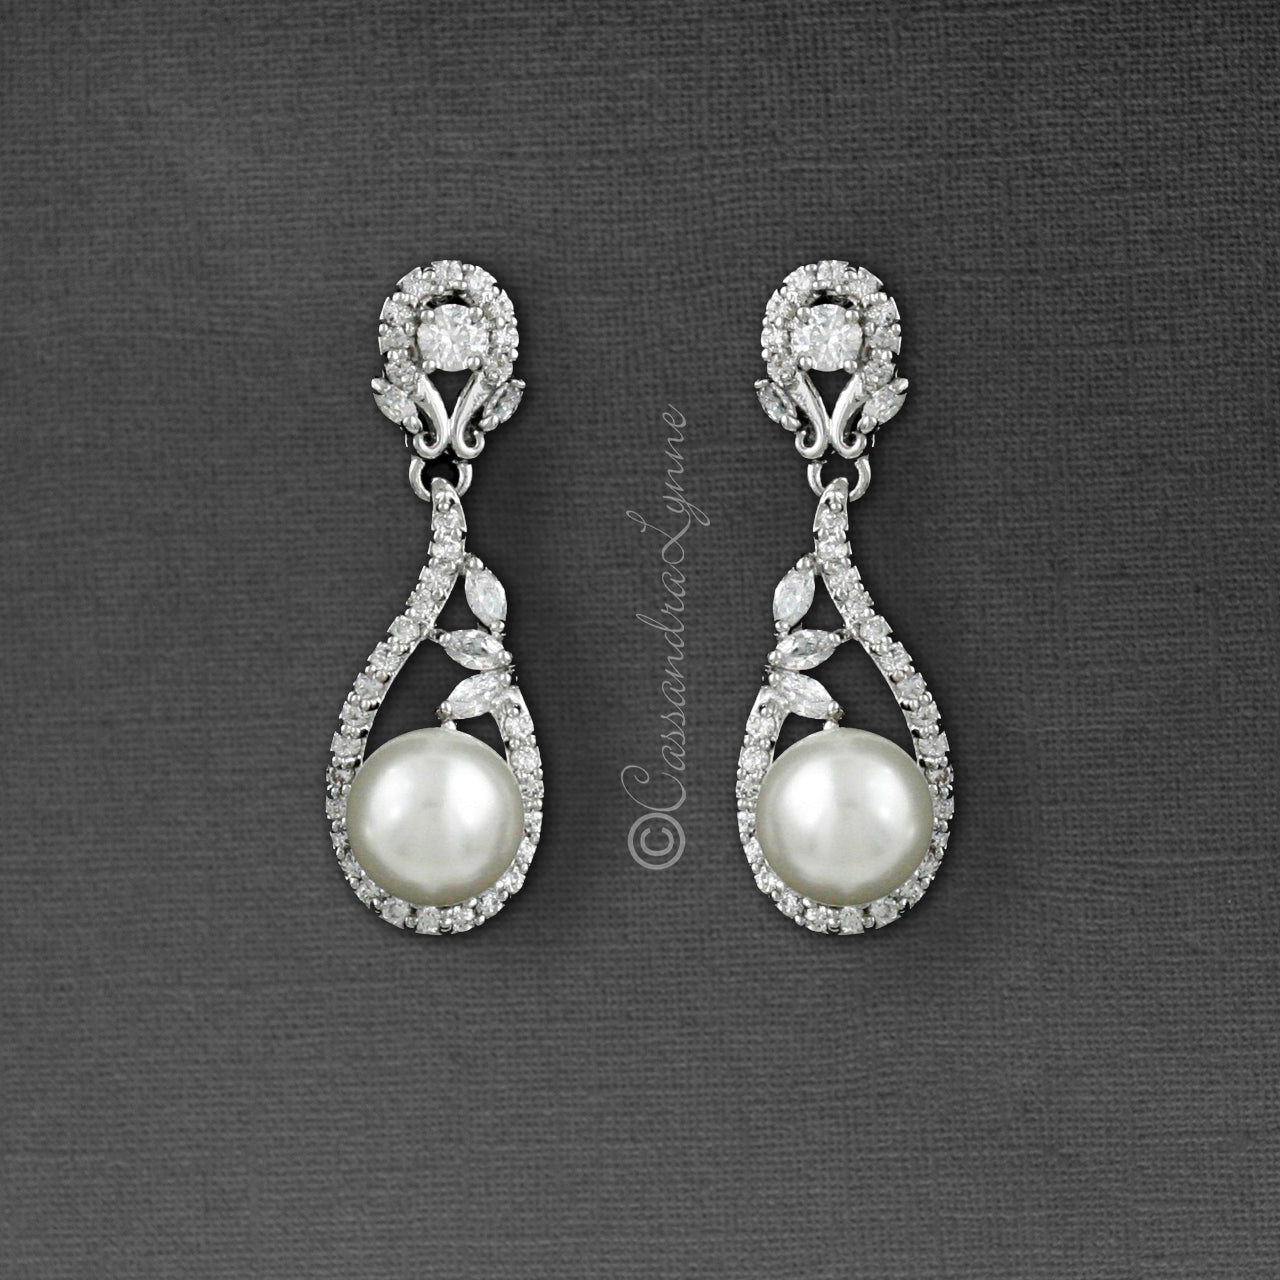 CZ Drop Earrings with Pearls for the Bride